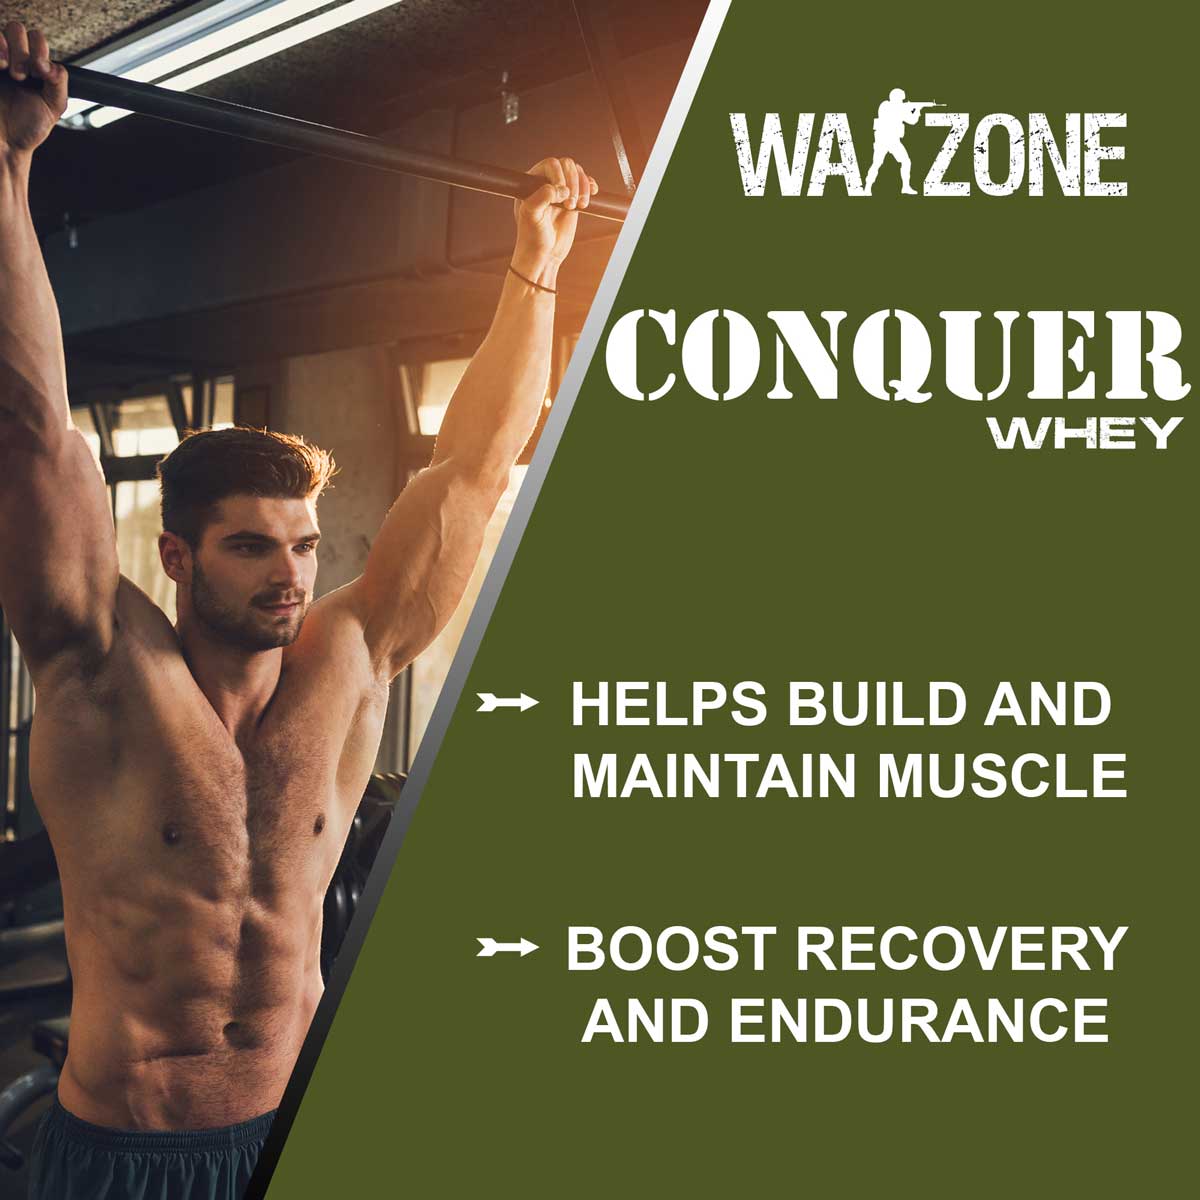 whey-conquer-image